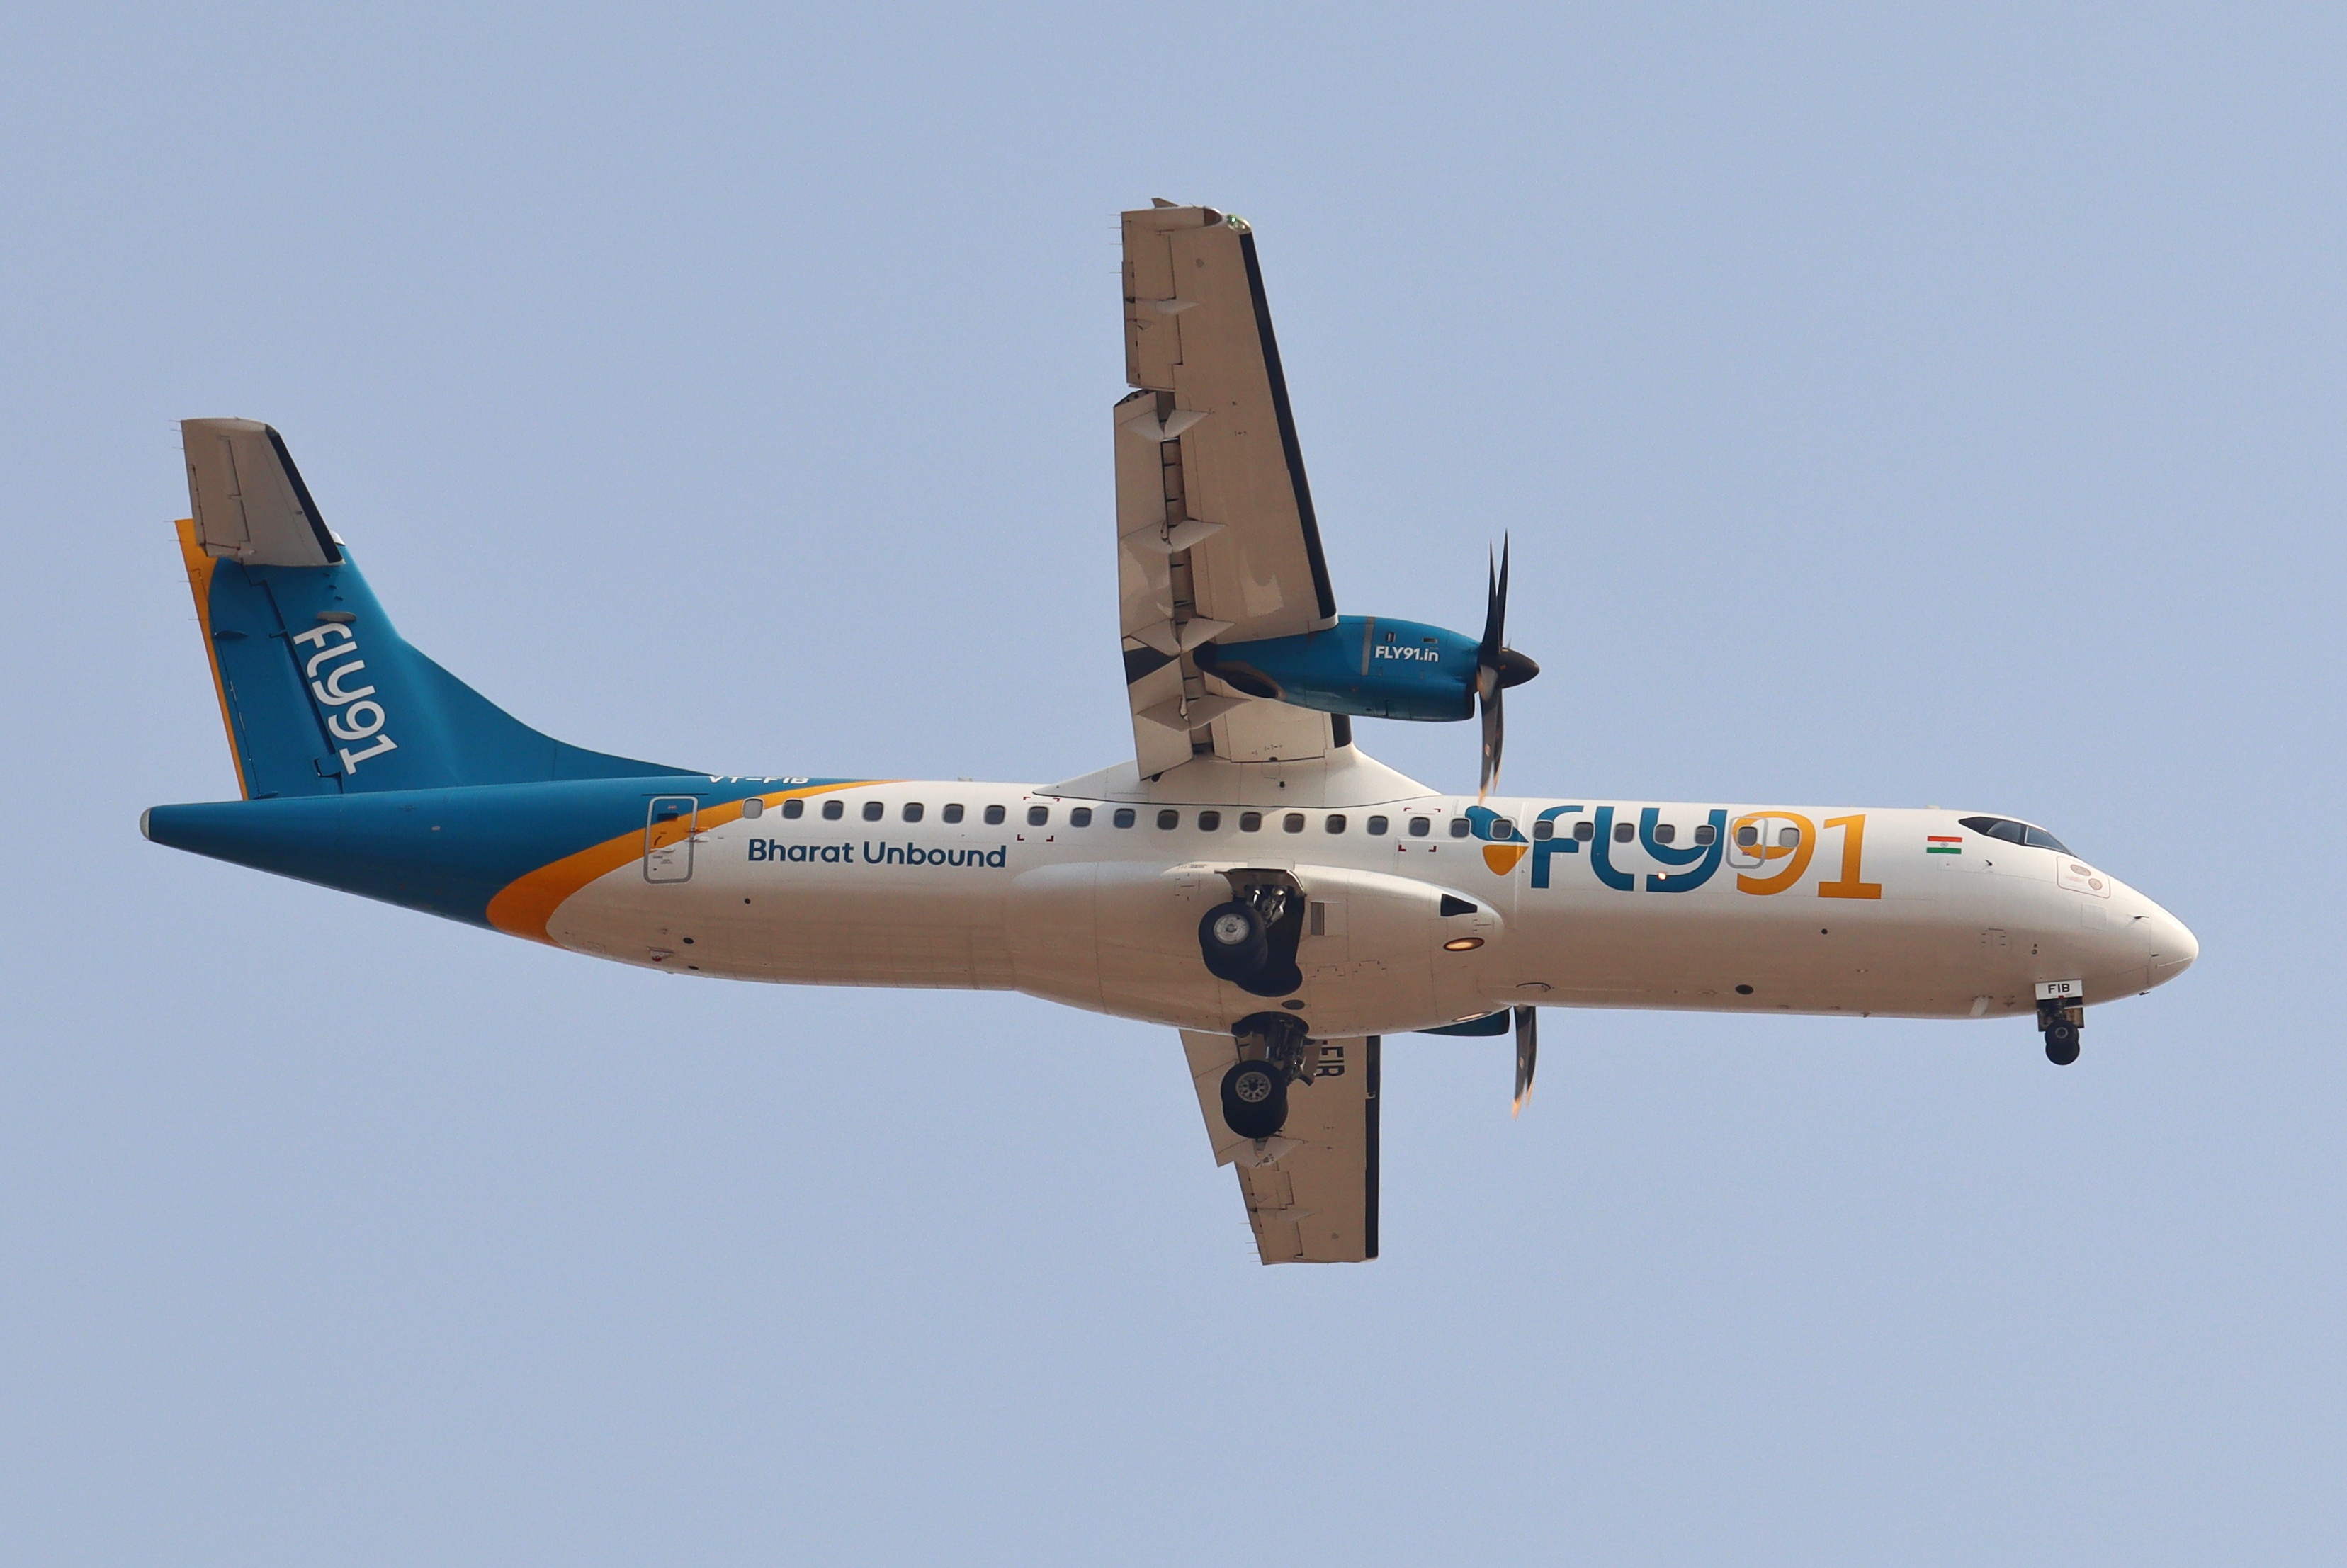 FLY91 selects ATR’s pay-by-the-hour support programme